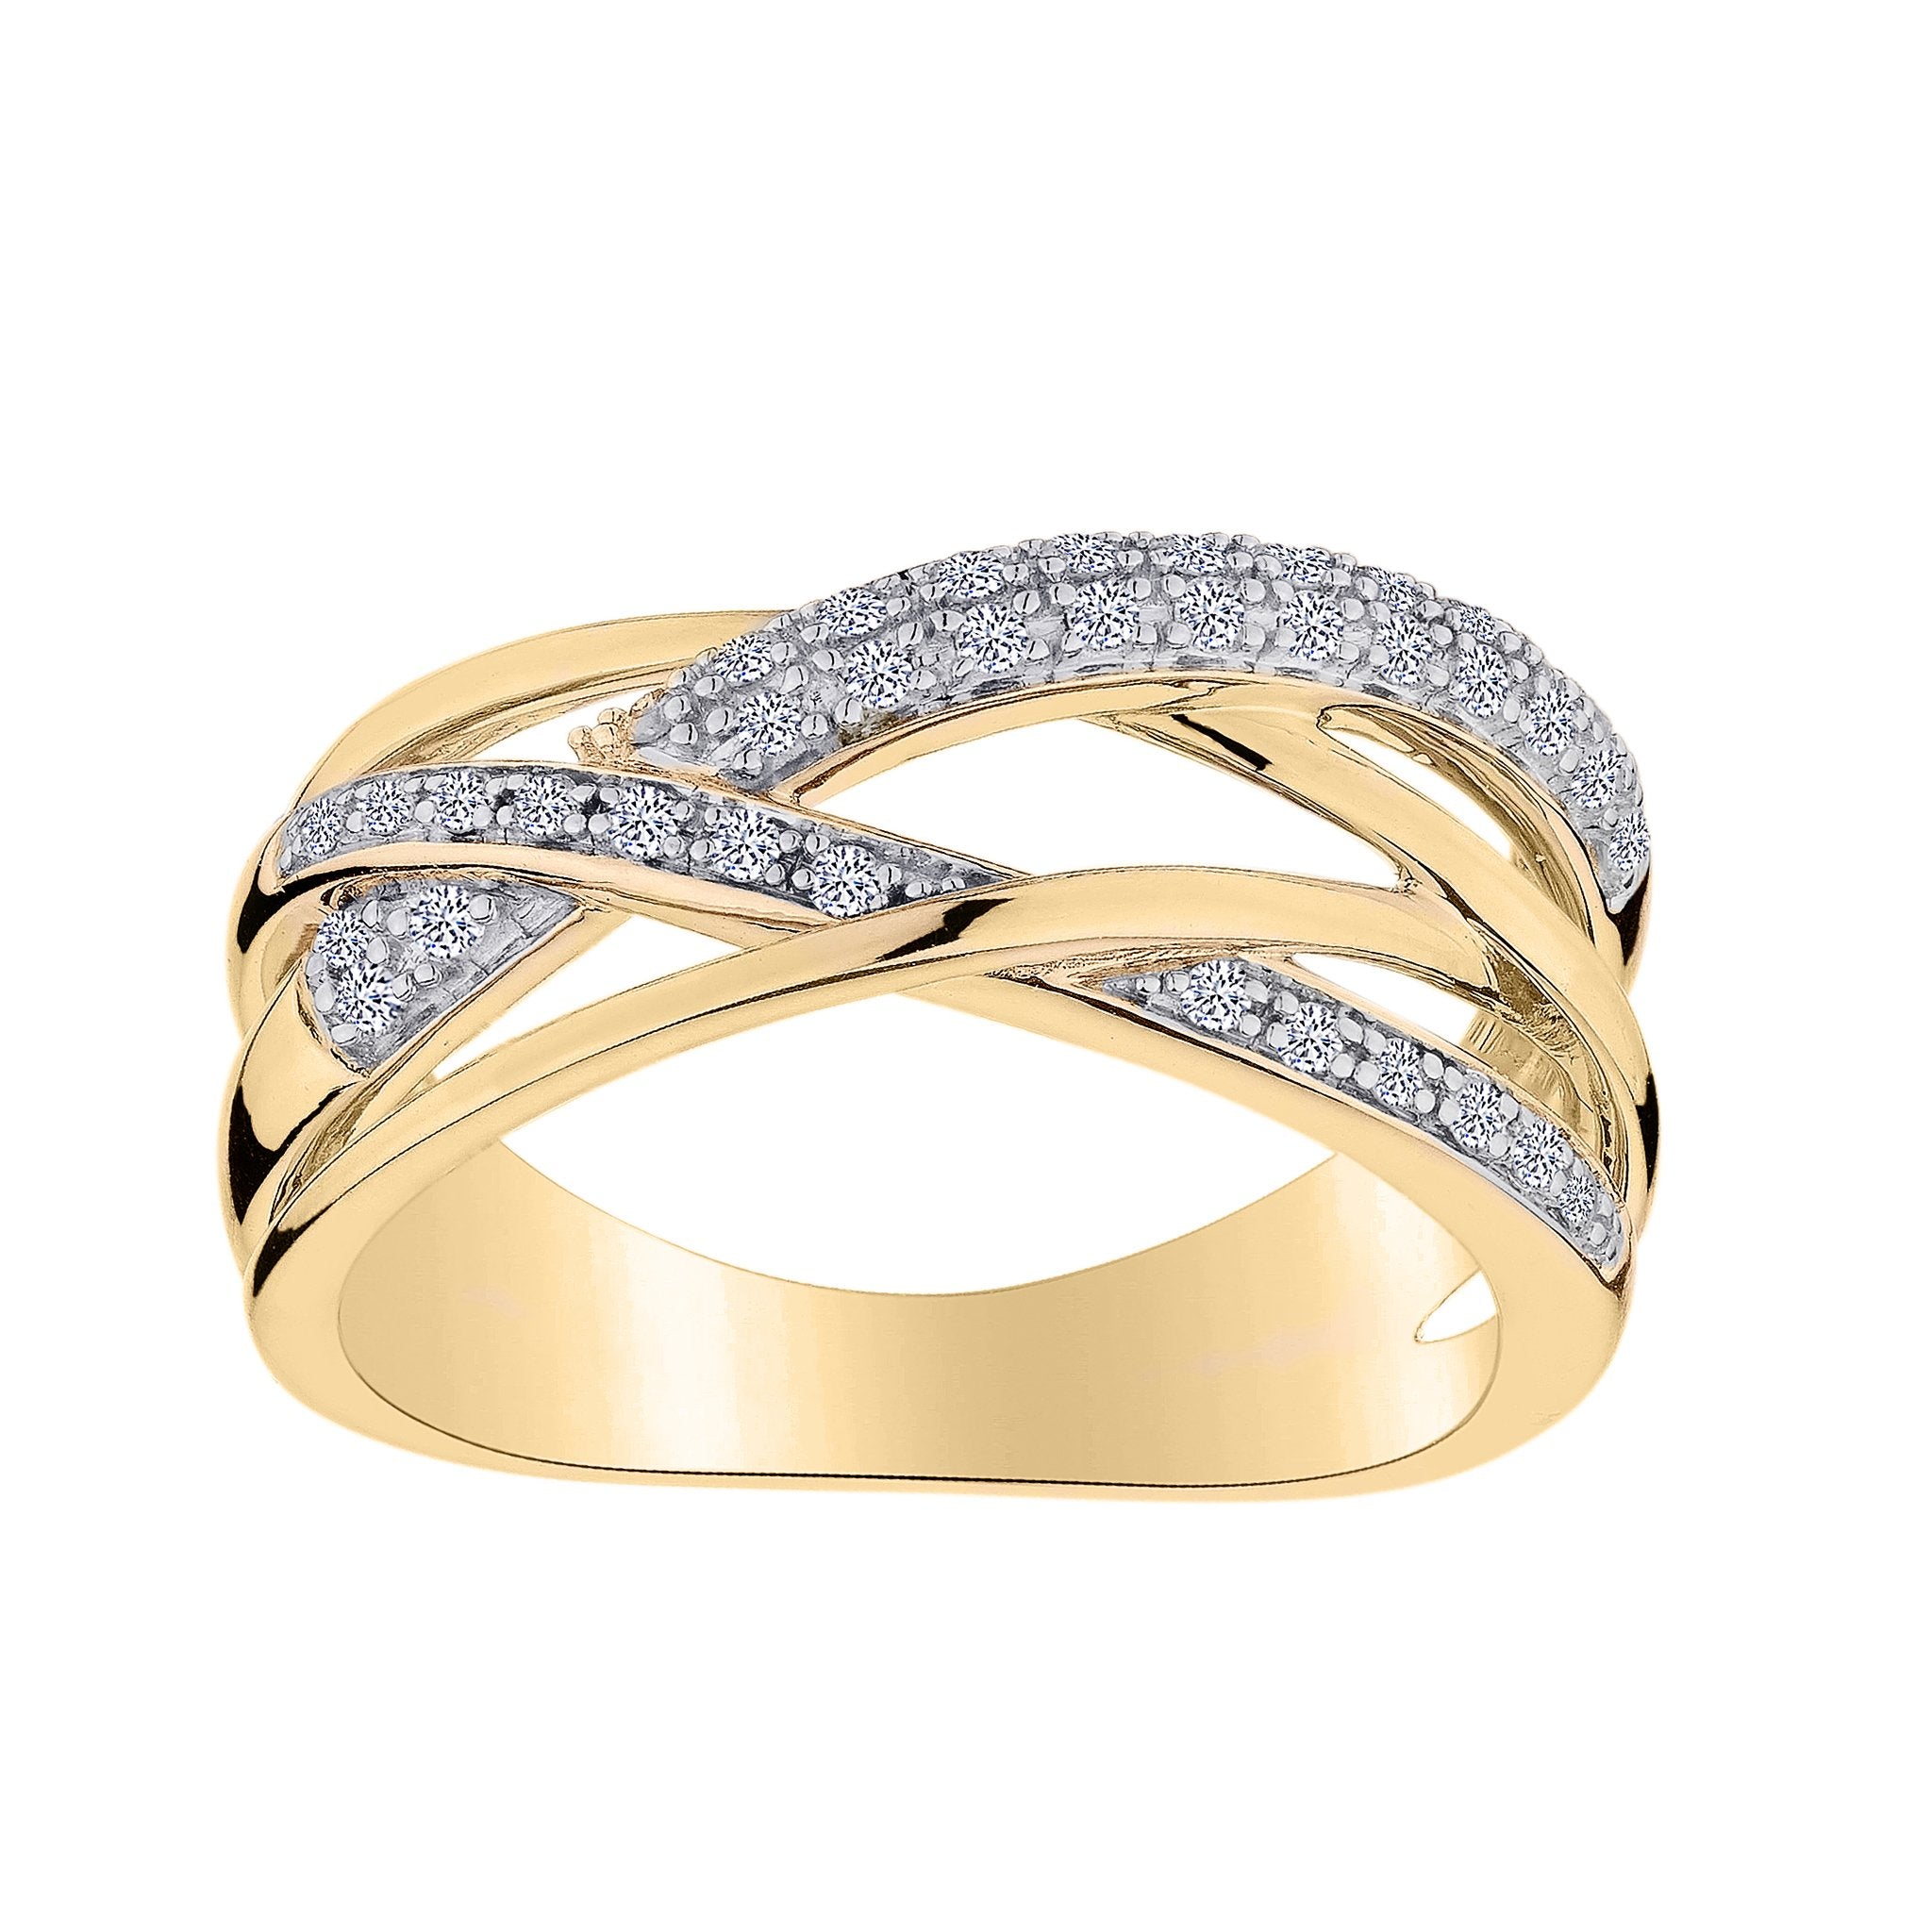 .25 CARAT DIAMOND "LOVE WEAVES" RING, 10kt YELLOW GOLD. Fashion Rings - Griffin Jewellery Designs